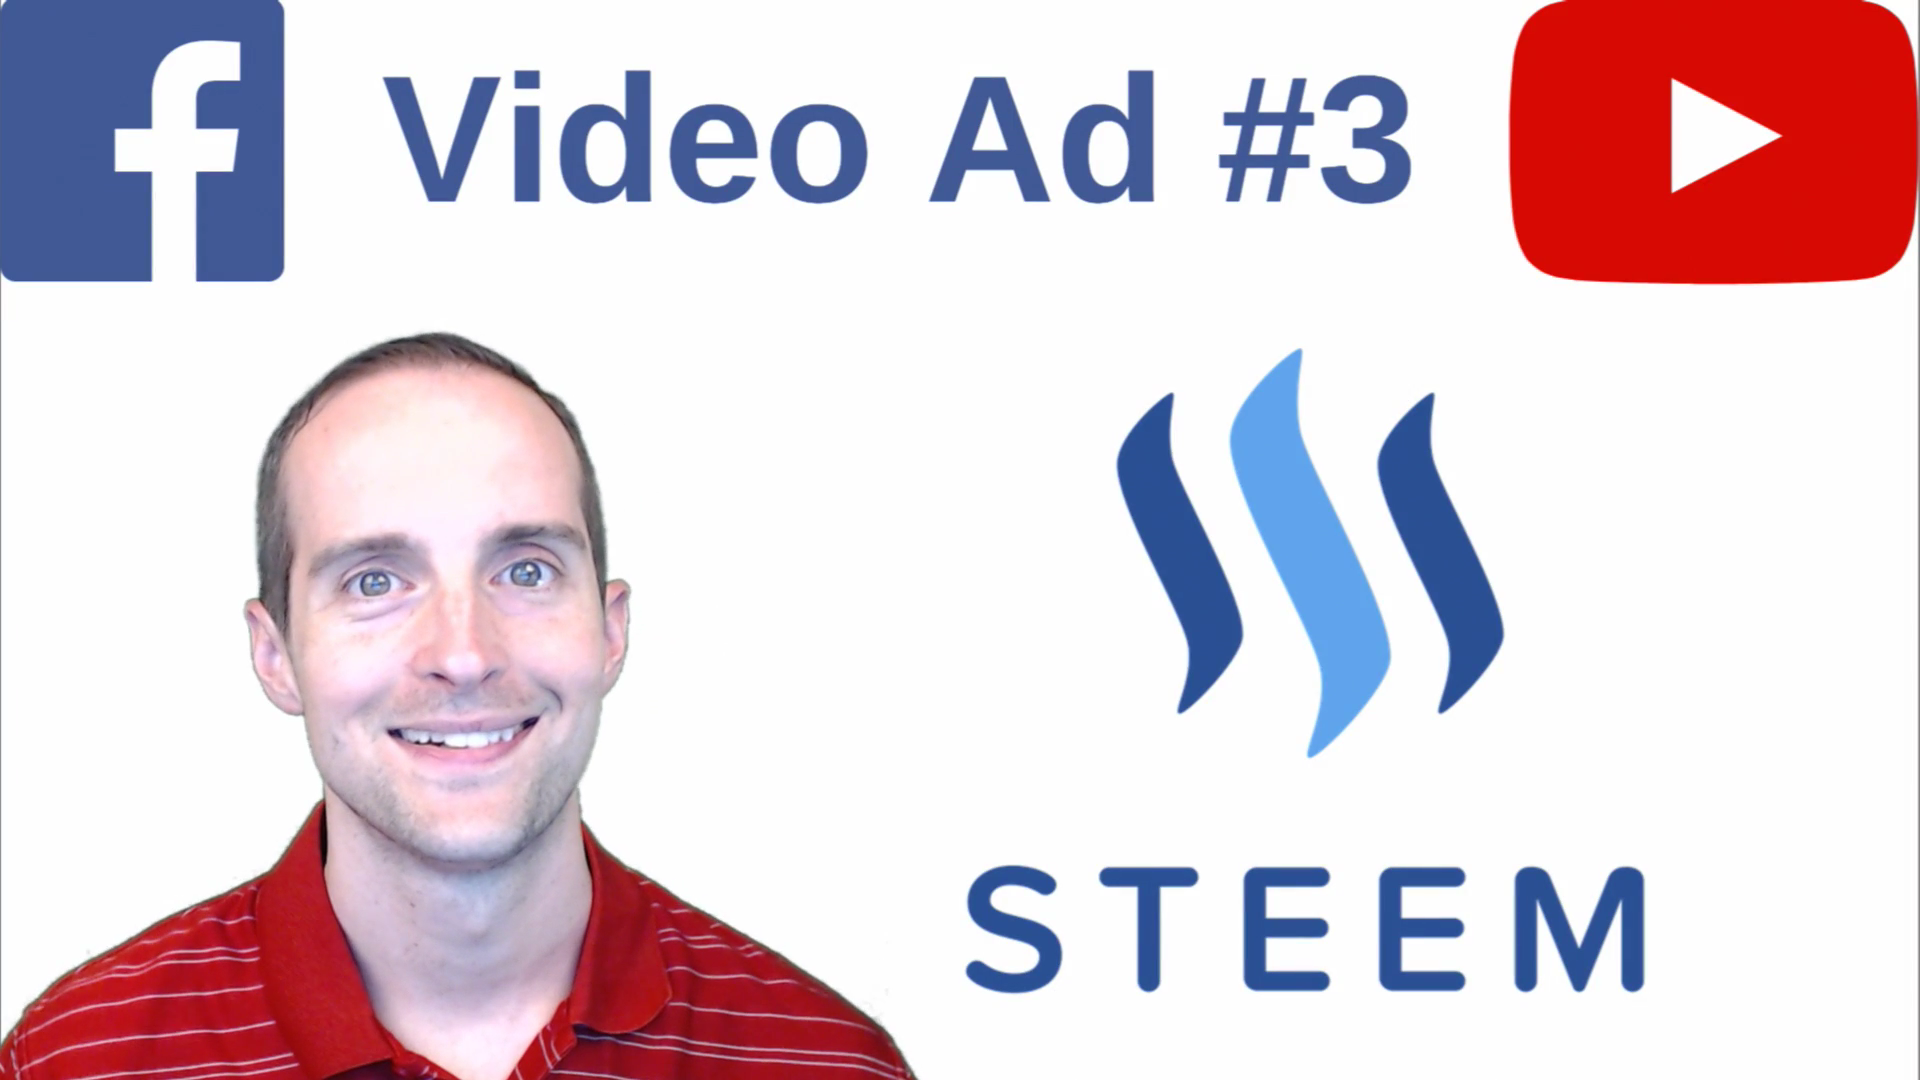 steem video ad 3 red shirt.png